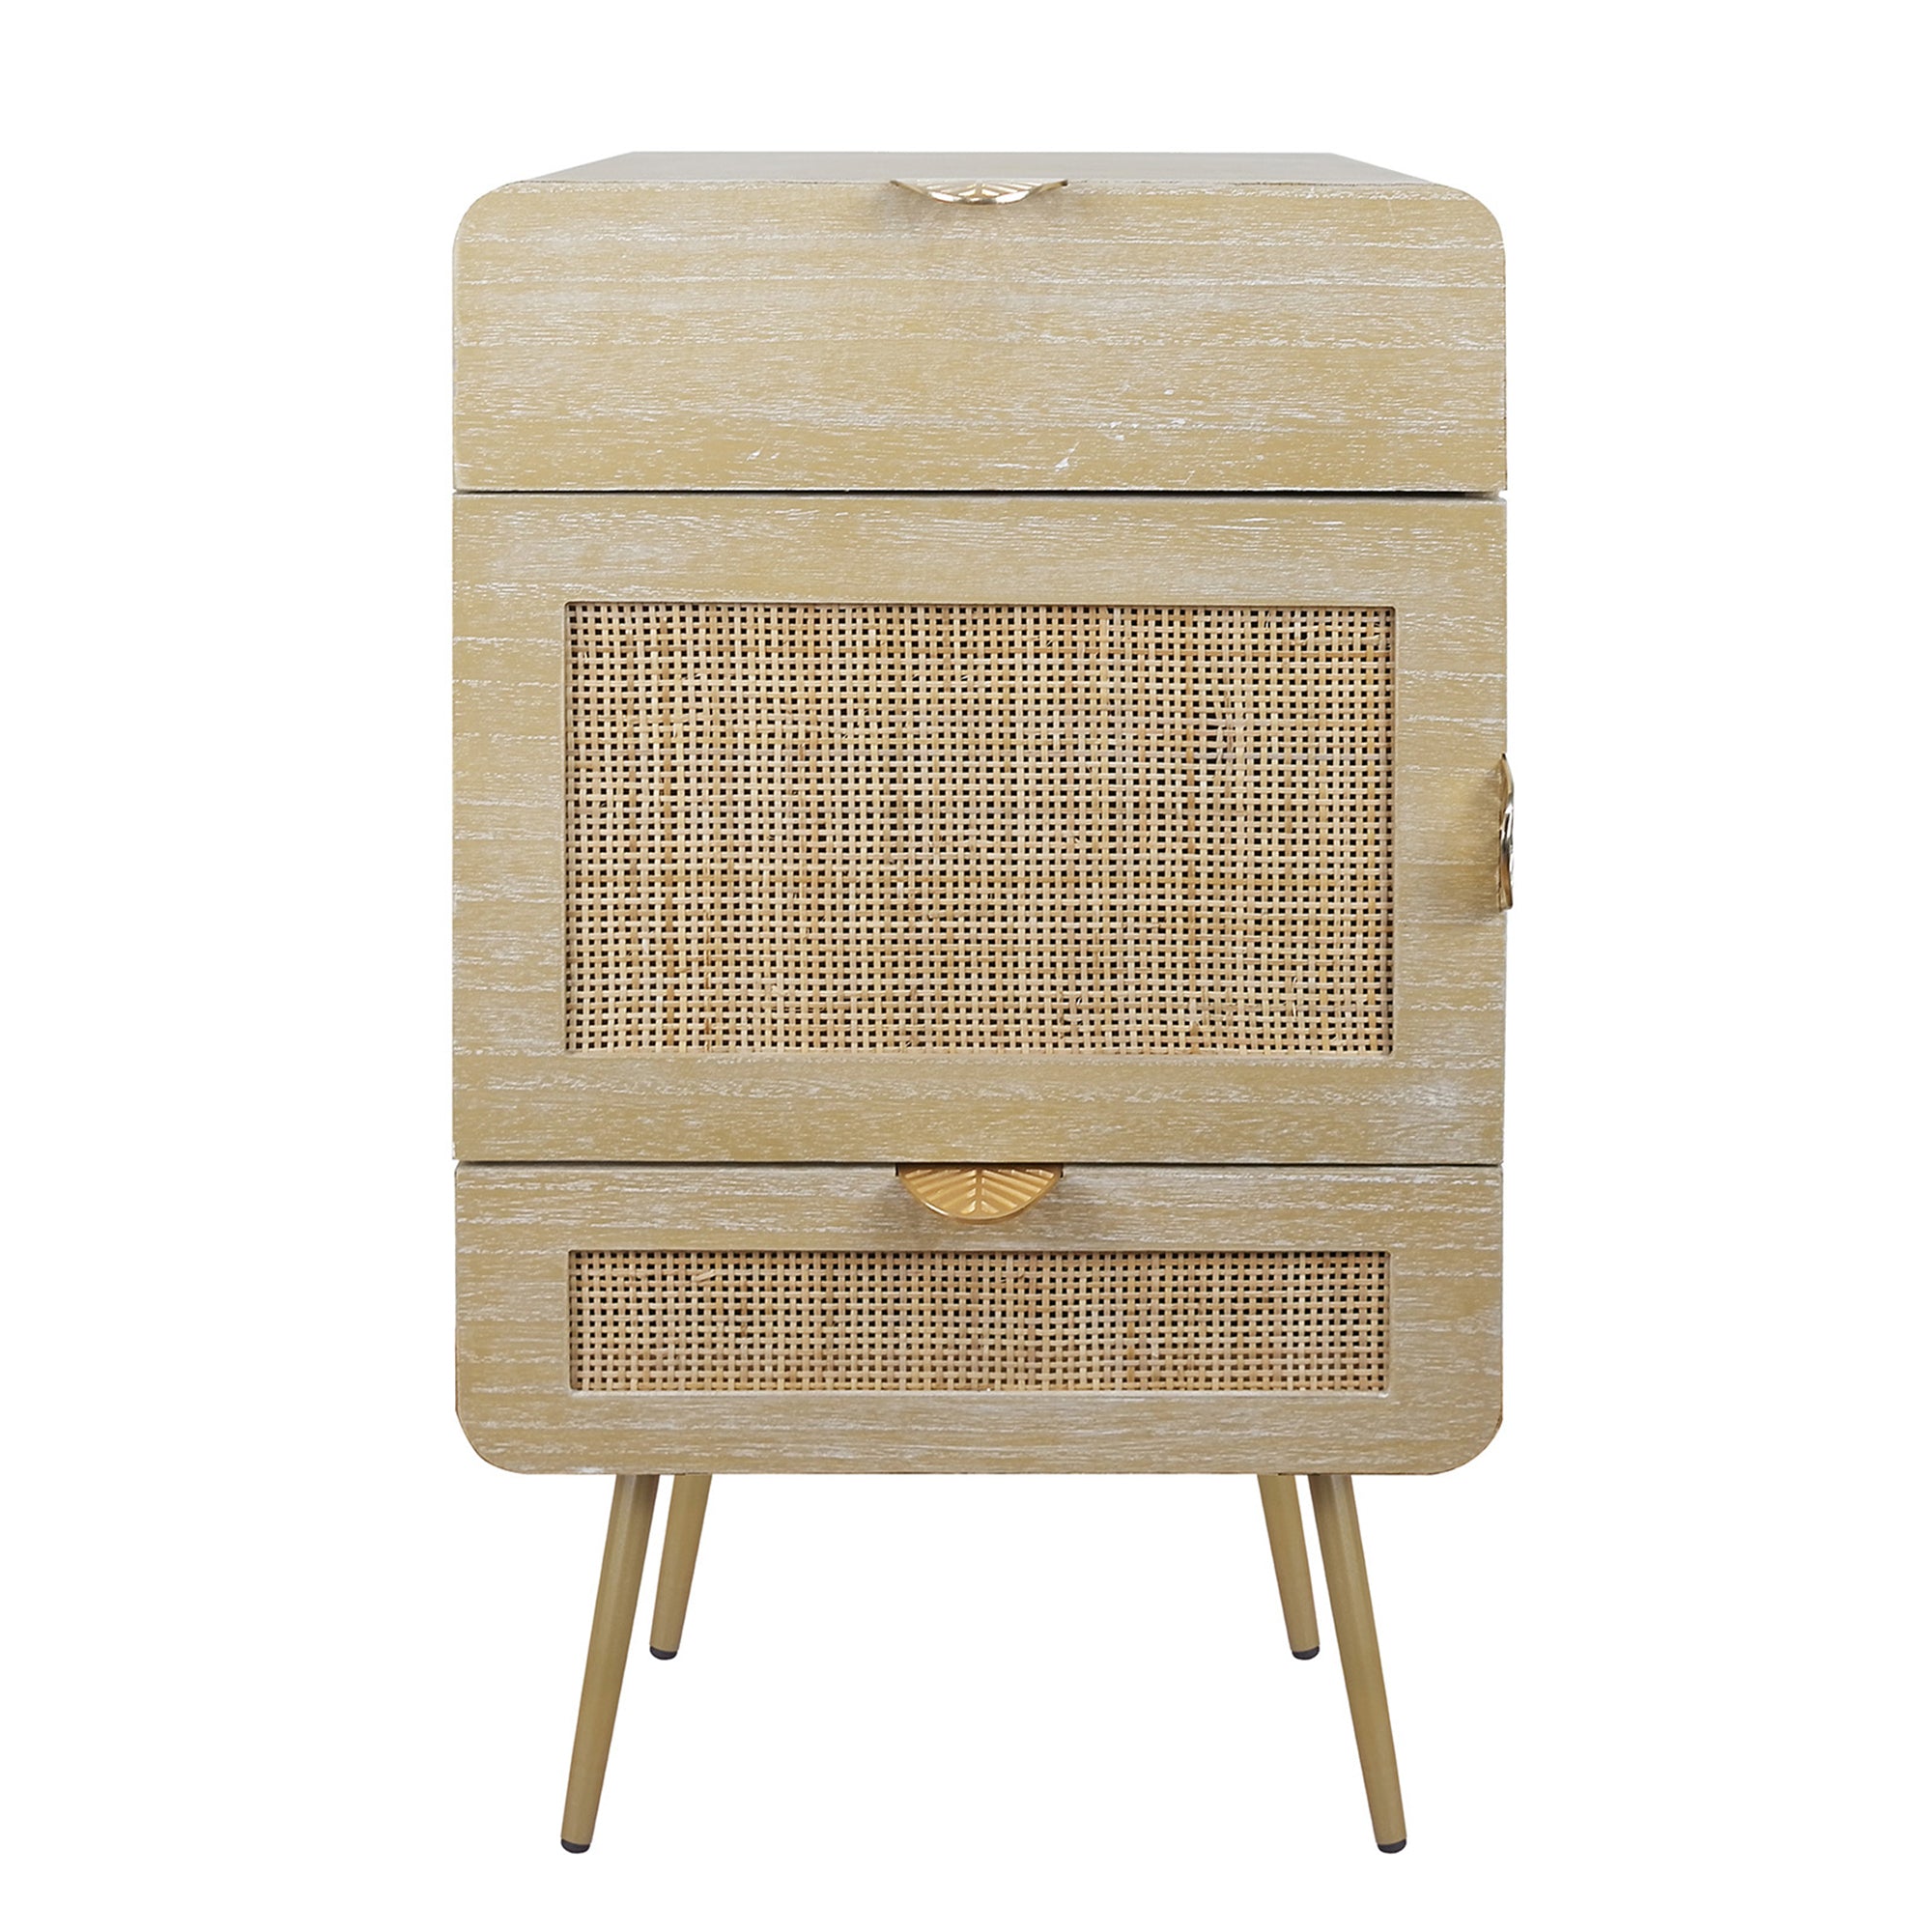 LAGO Natural Wooden Nightstand with Rattan Panel